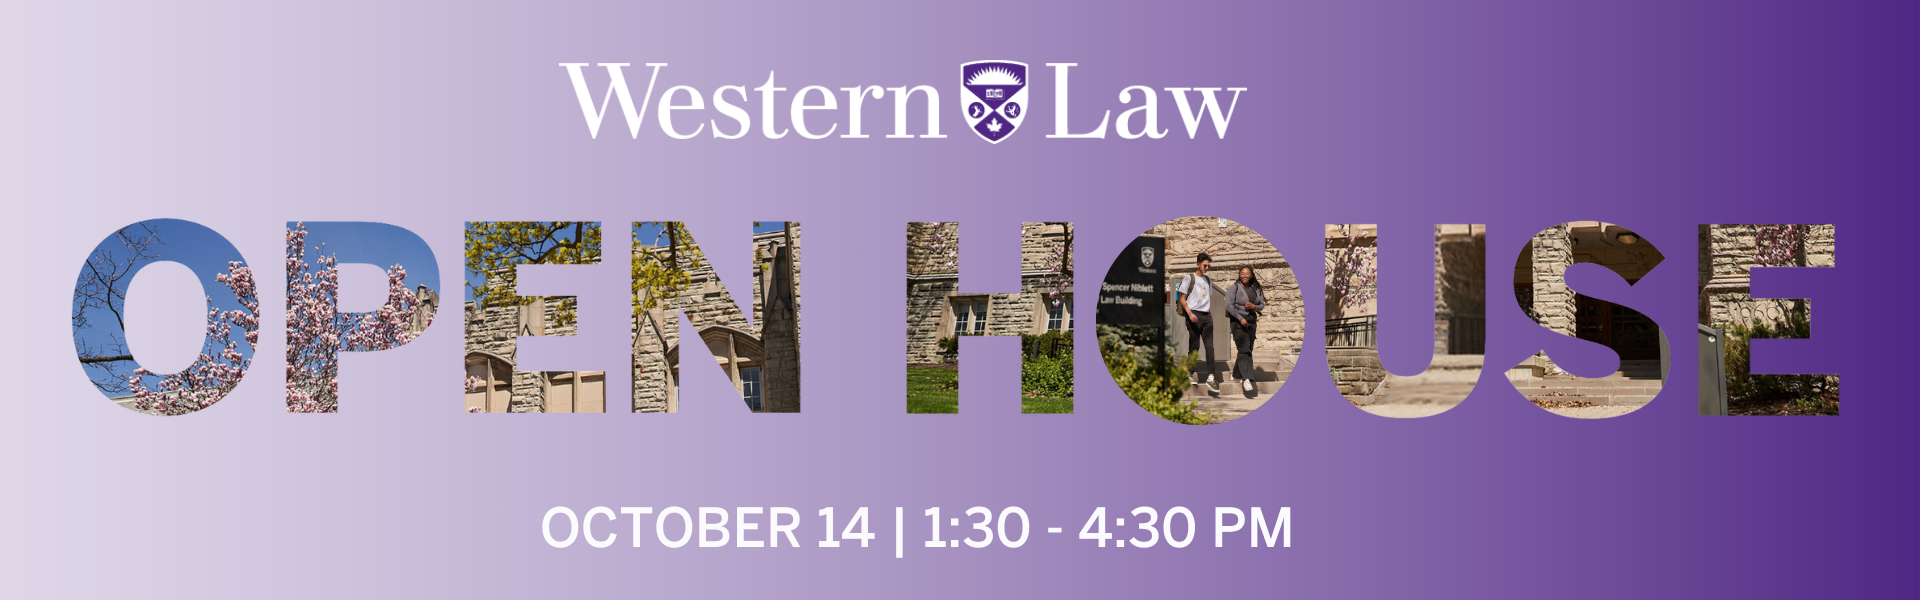 Western Law Open House October 14 1:30 - 3:30 PM